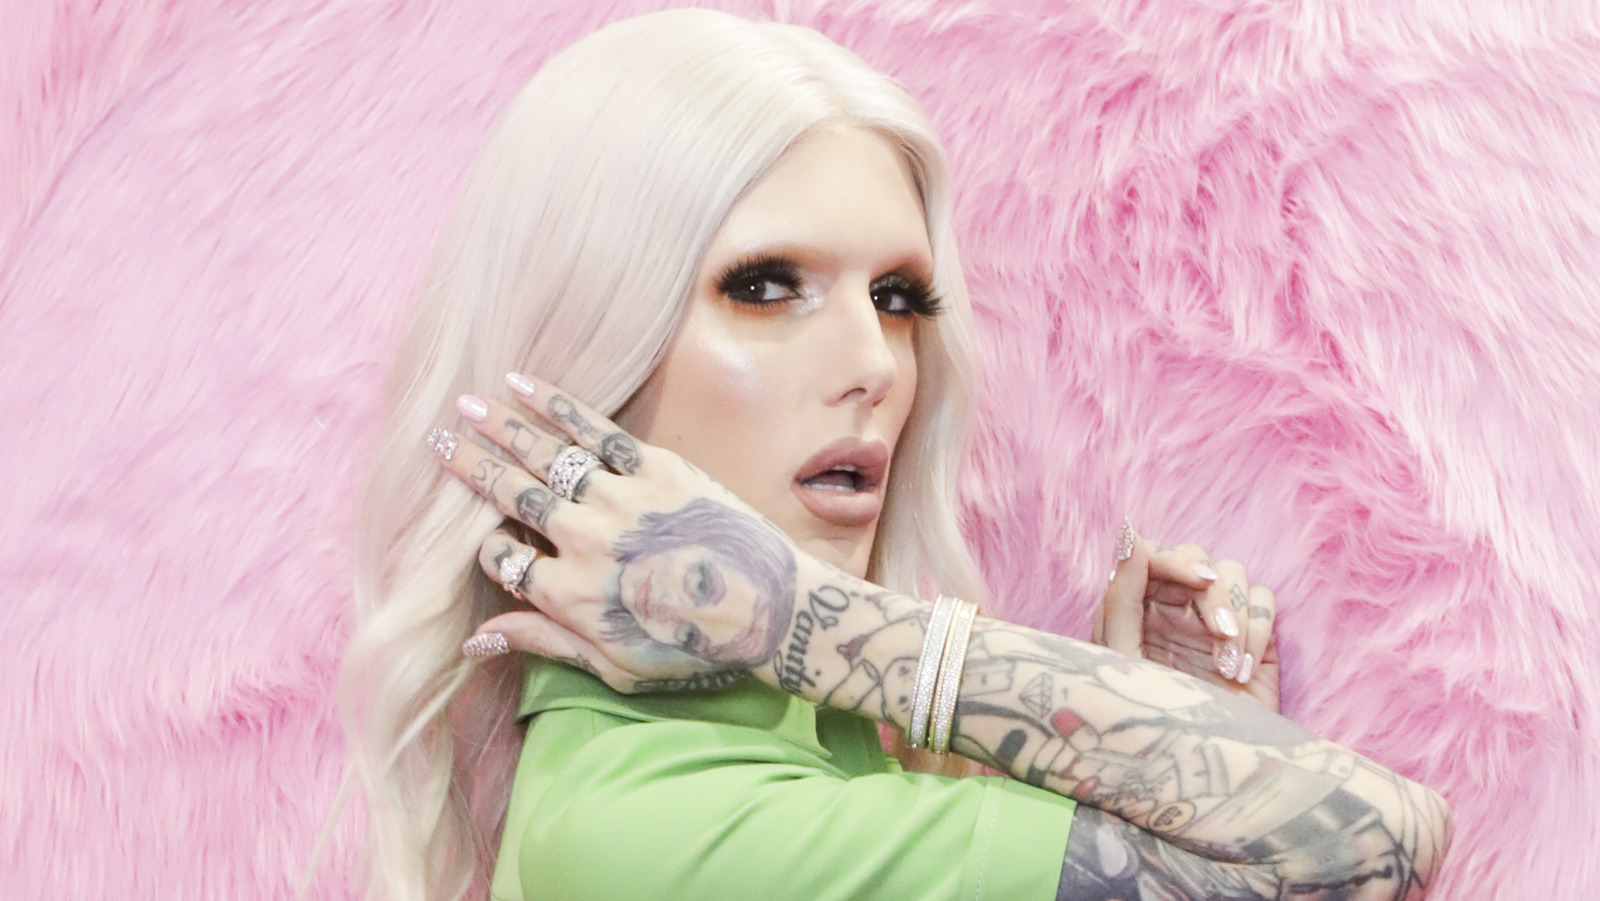 Here's What Jeffree Star Looks Like Without Makeup